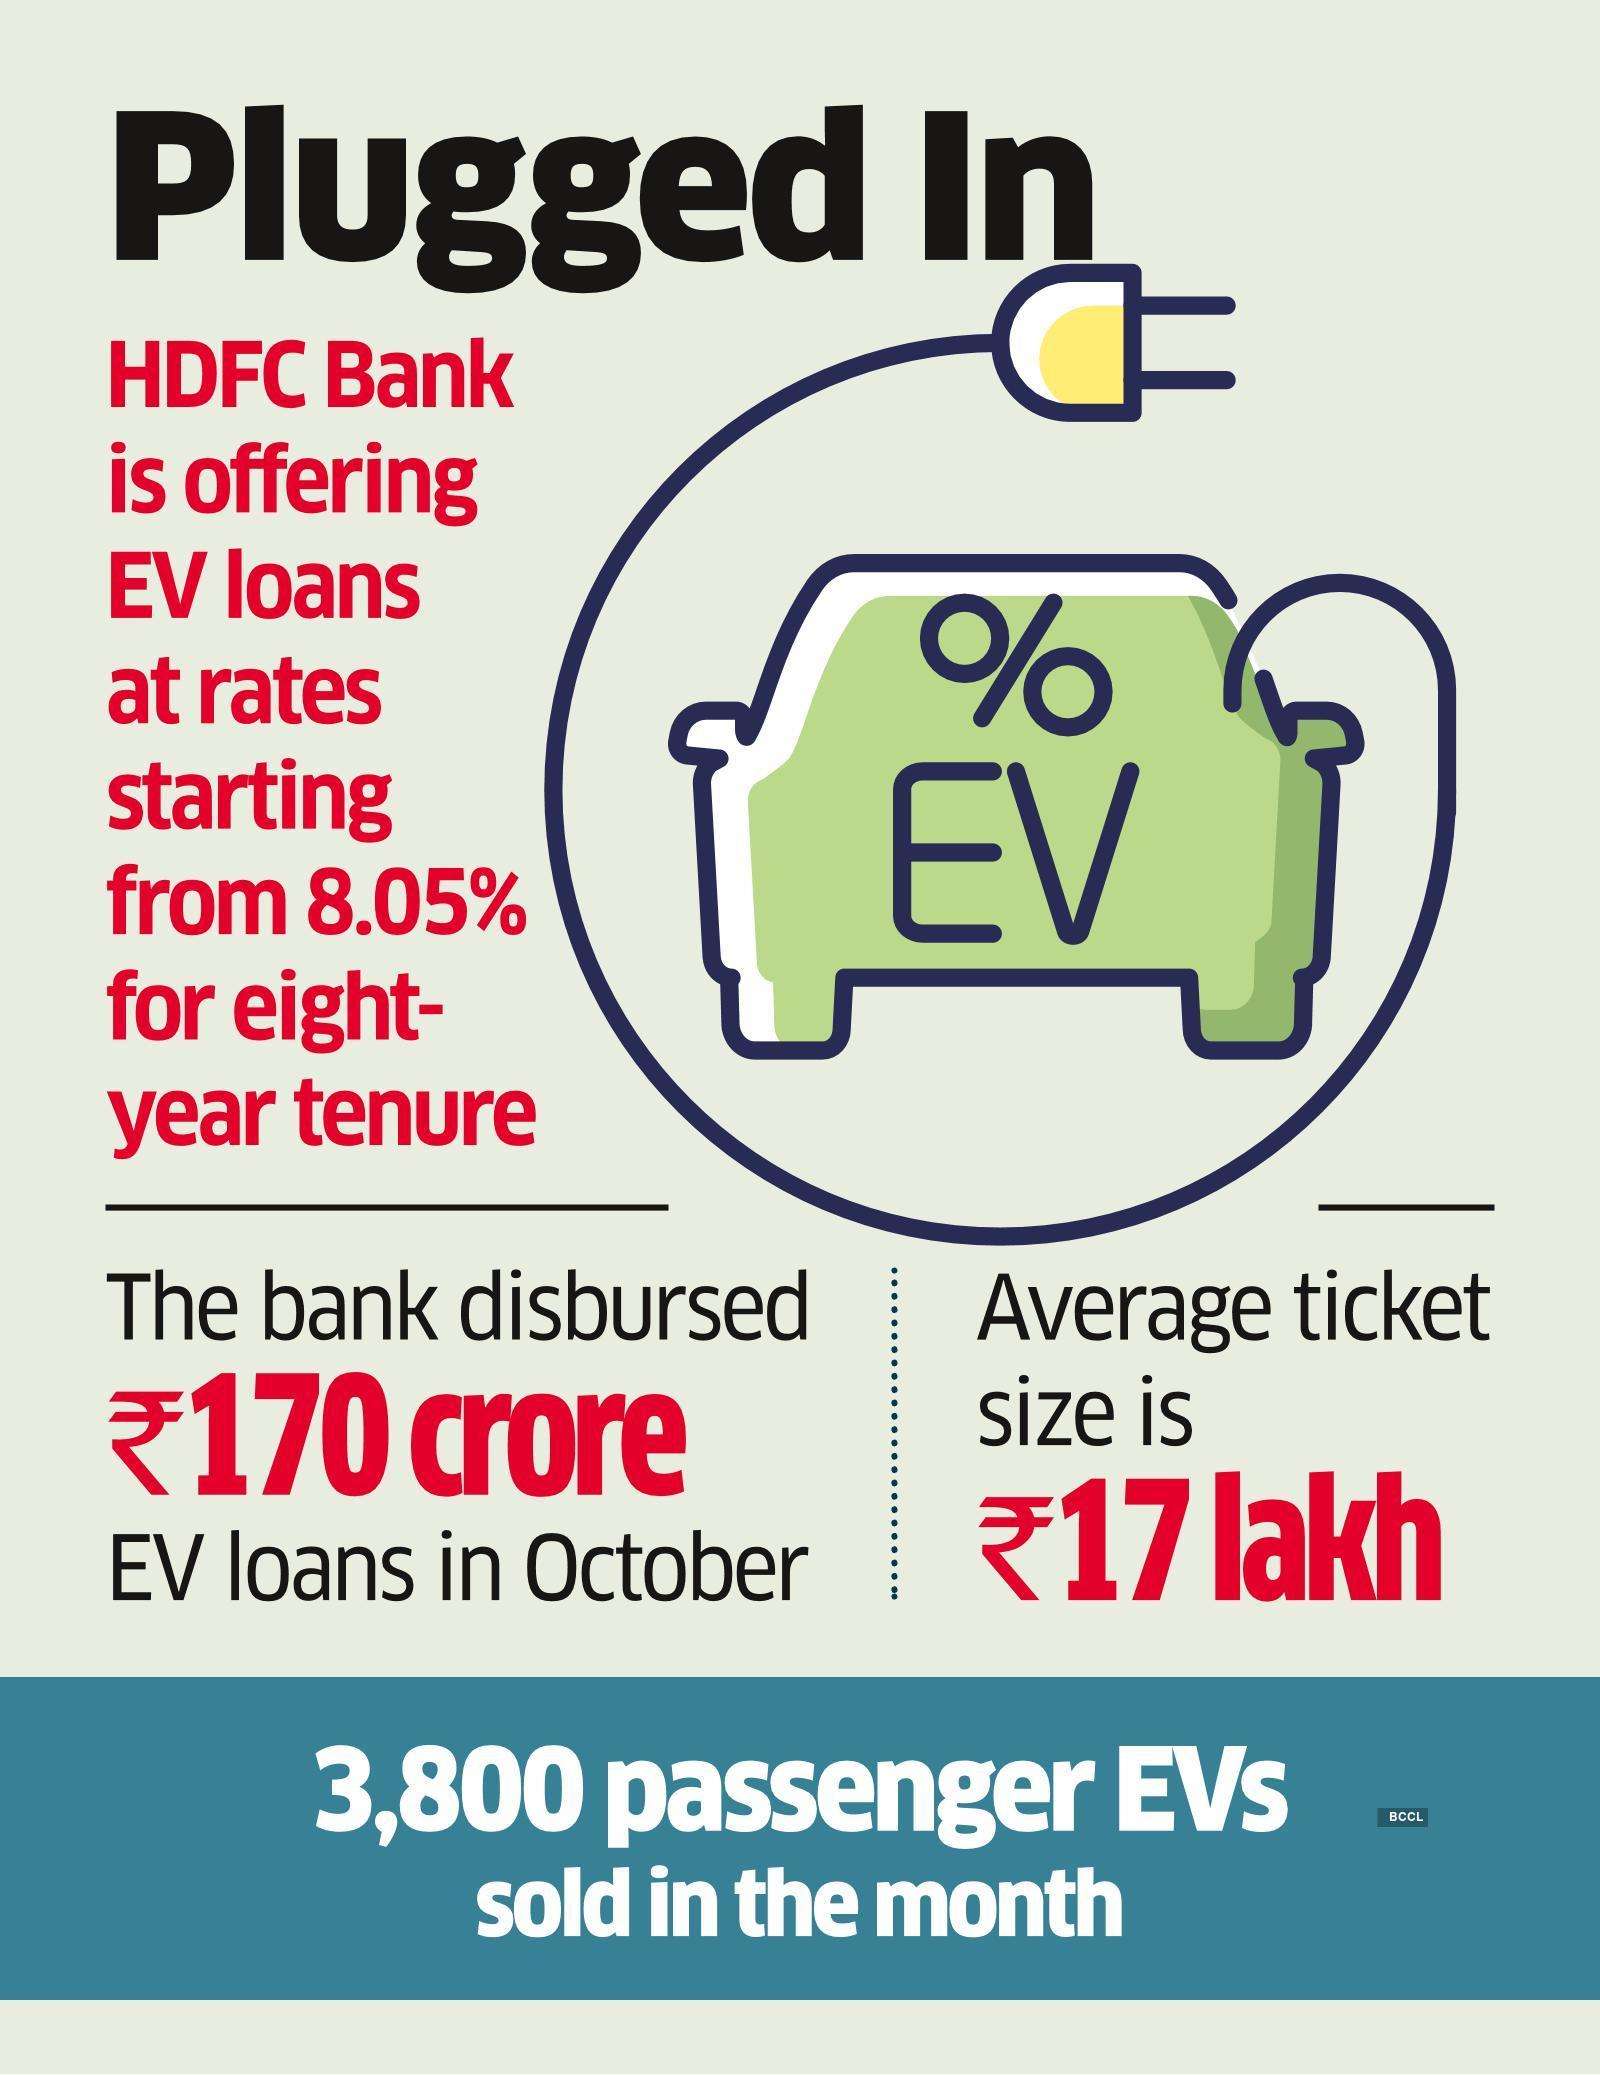 Test drive over, HDFC Bank plans to go big on EV loans